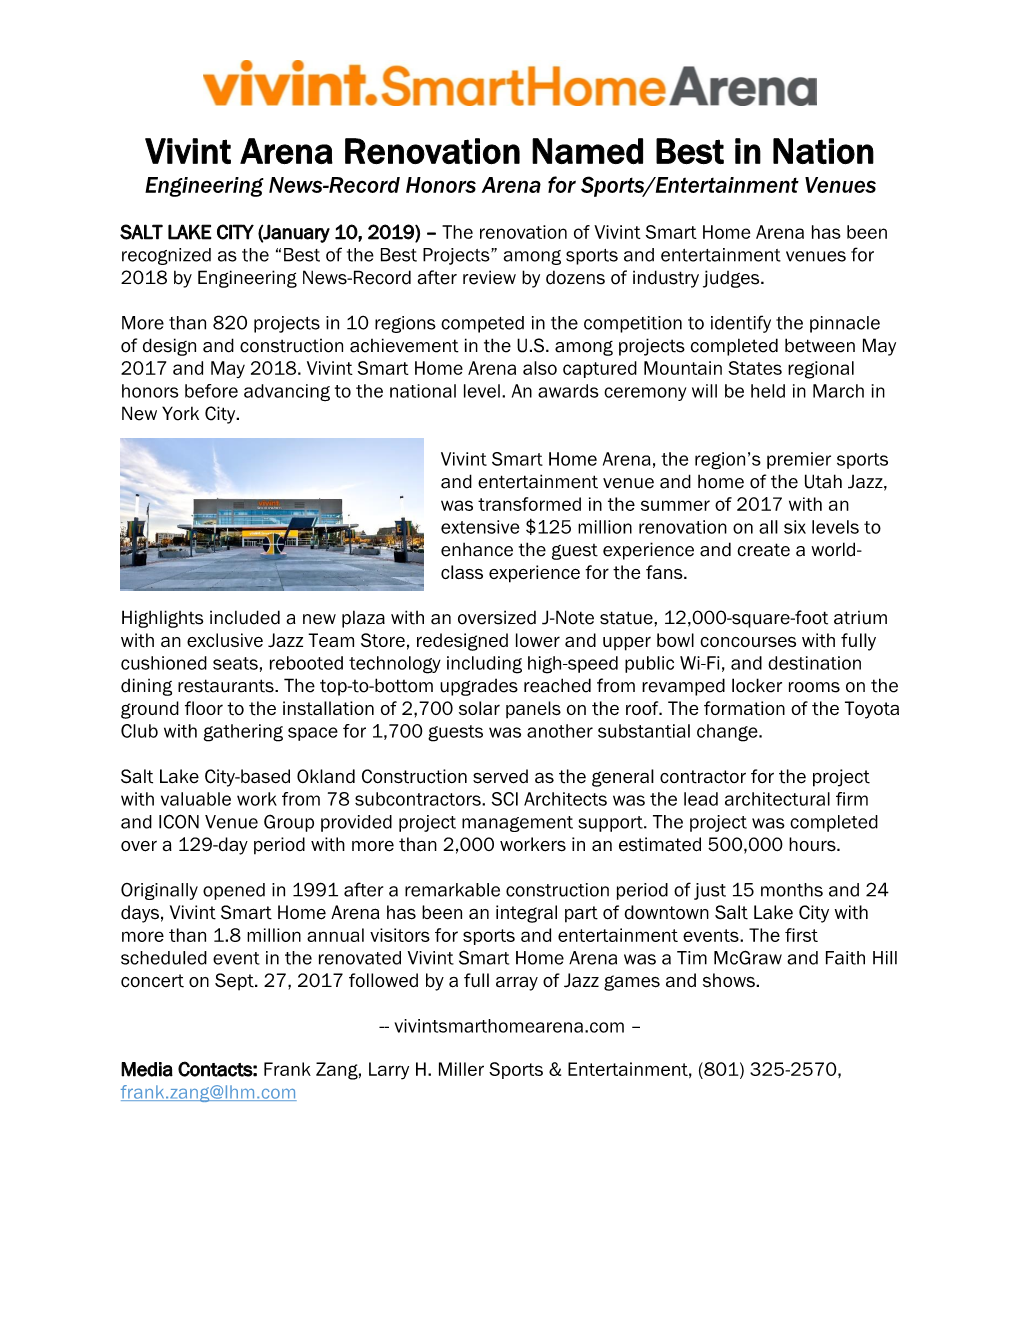 Vivint Arena Renovation Named Best in Nation Engineering News-Record Honors Arena for Sports/Entertainment Venues